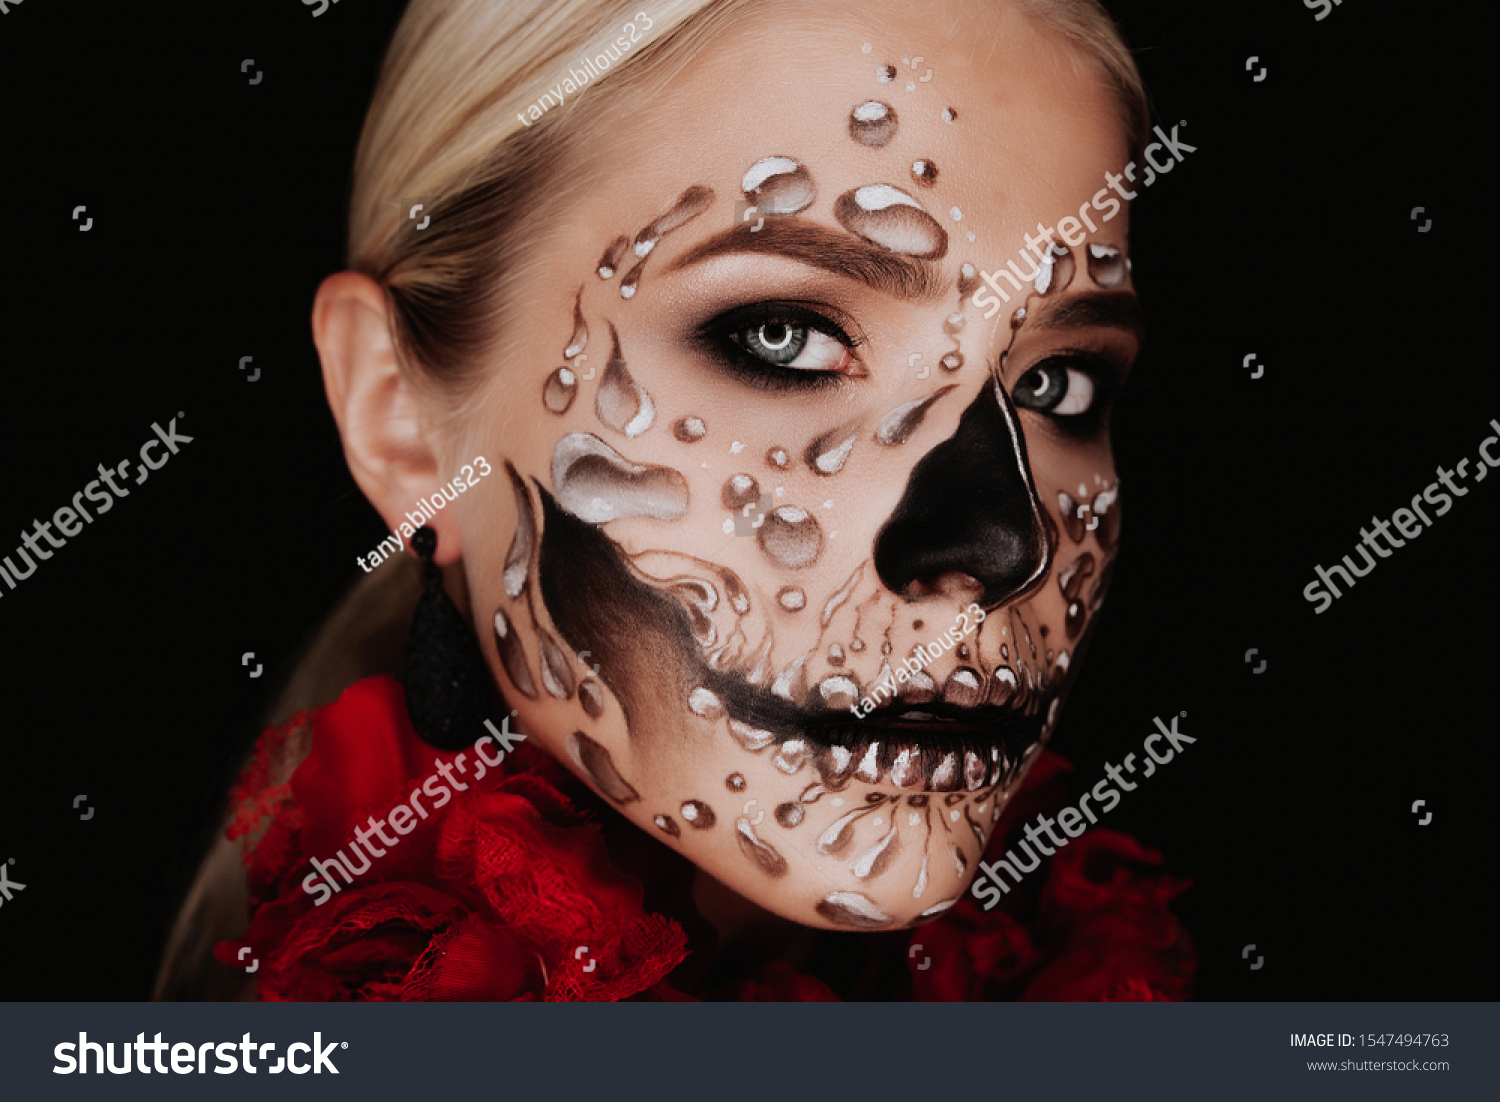 Portrait of a woman with sugar skull makeup over red background. Halloween costume and make-up.  #1547494763